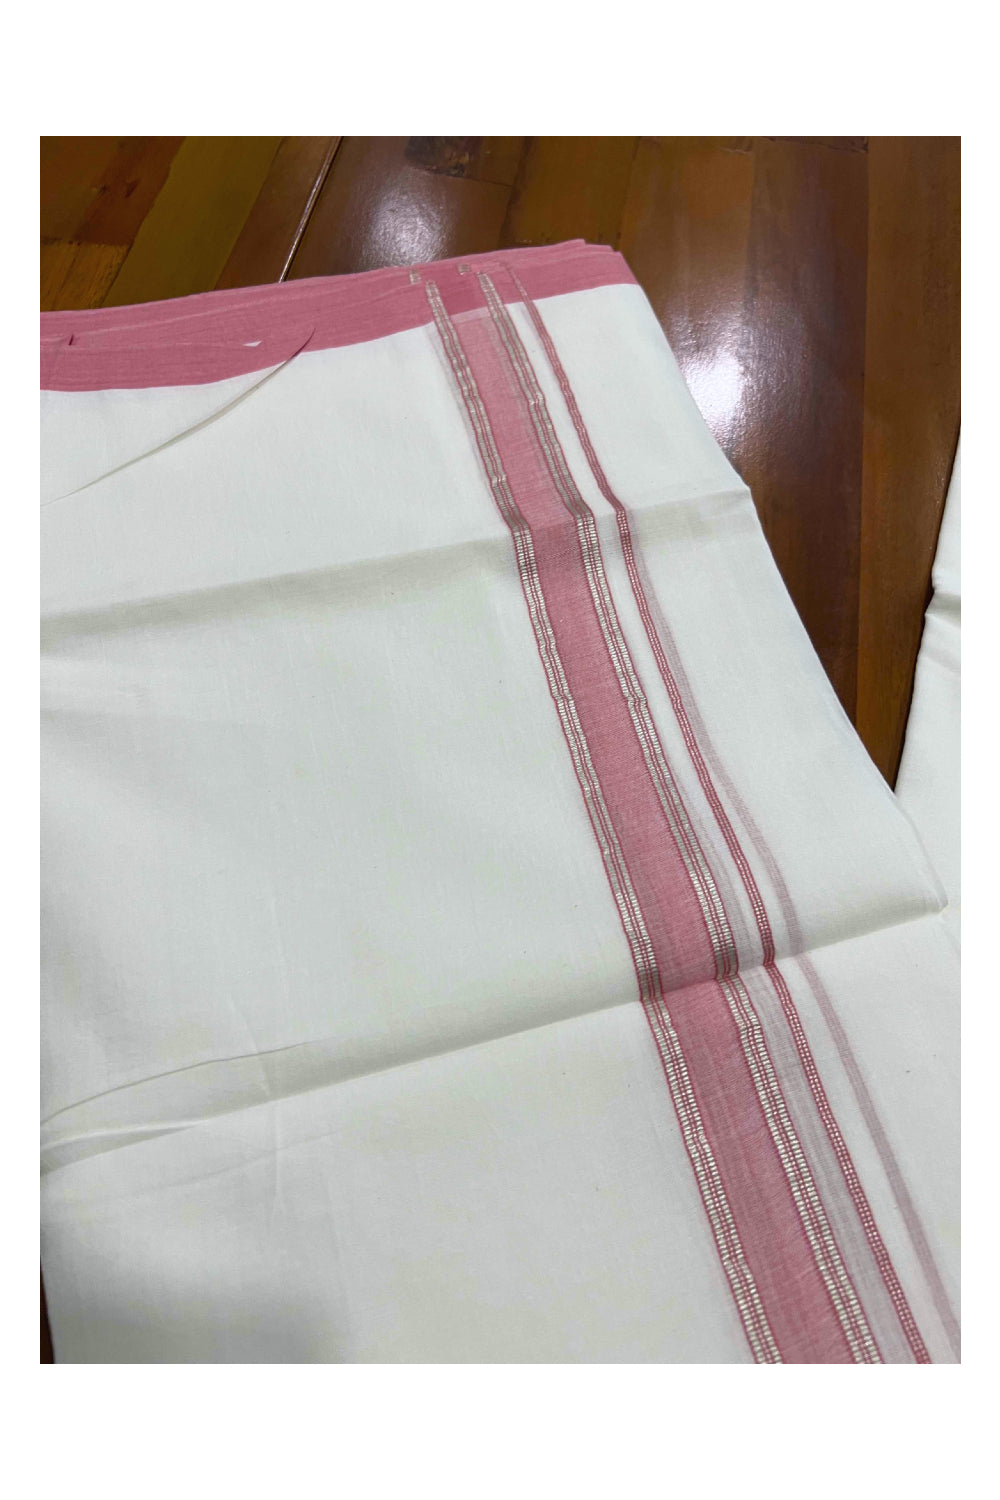 Pure White Cotton Mundu with Peach and Silver Kara (South Indian Dhoti)